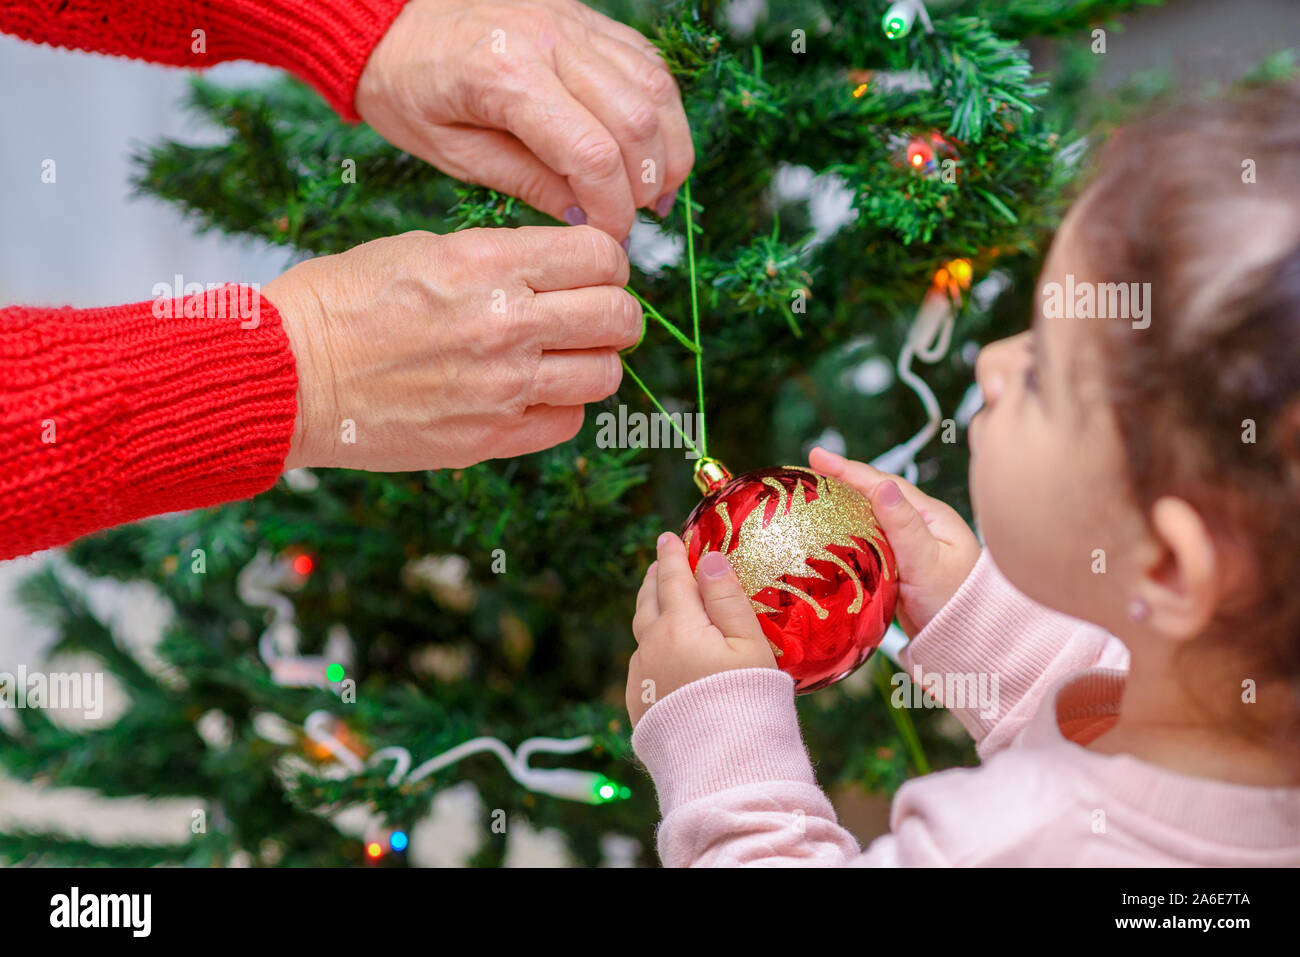 https://c8.alamy.com/comp/2A6E7TA/merry-christmas-and-happy-holidays-grandmother-and-grandchild-decorate-the-christmas-tree-with-baubles-indoors-the-morning-before-xmas-portrait-loving-family-close-up-selective-focus-2A6E7TA.jpg